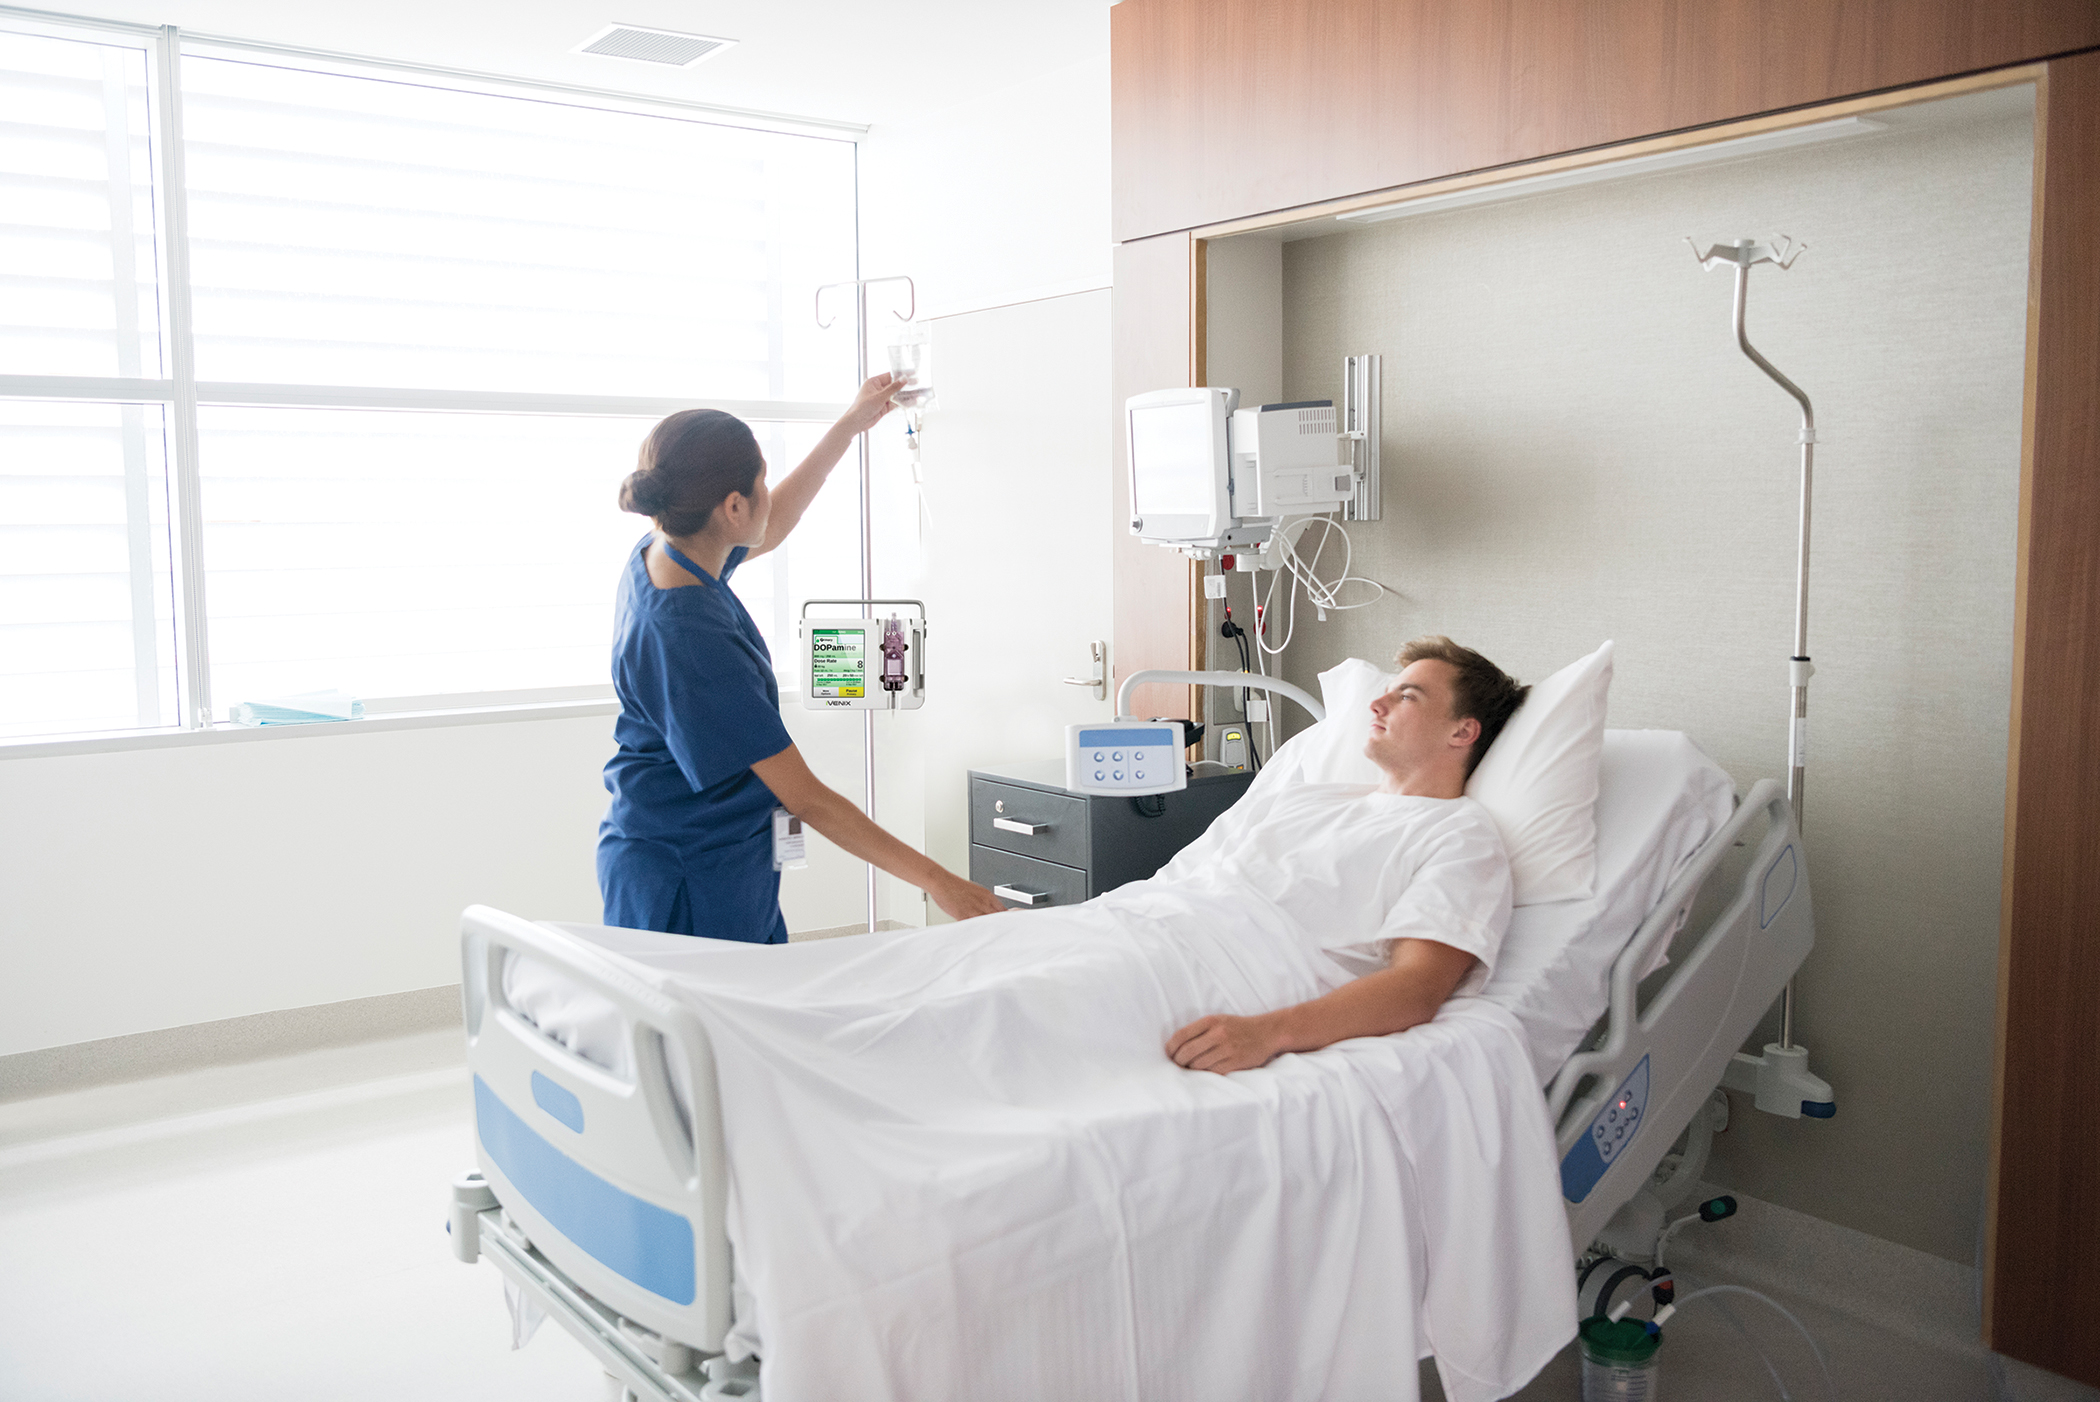 Female Nurse Tending To Male Patient In Hospital Bed Patient Safety And Quality Healthcare